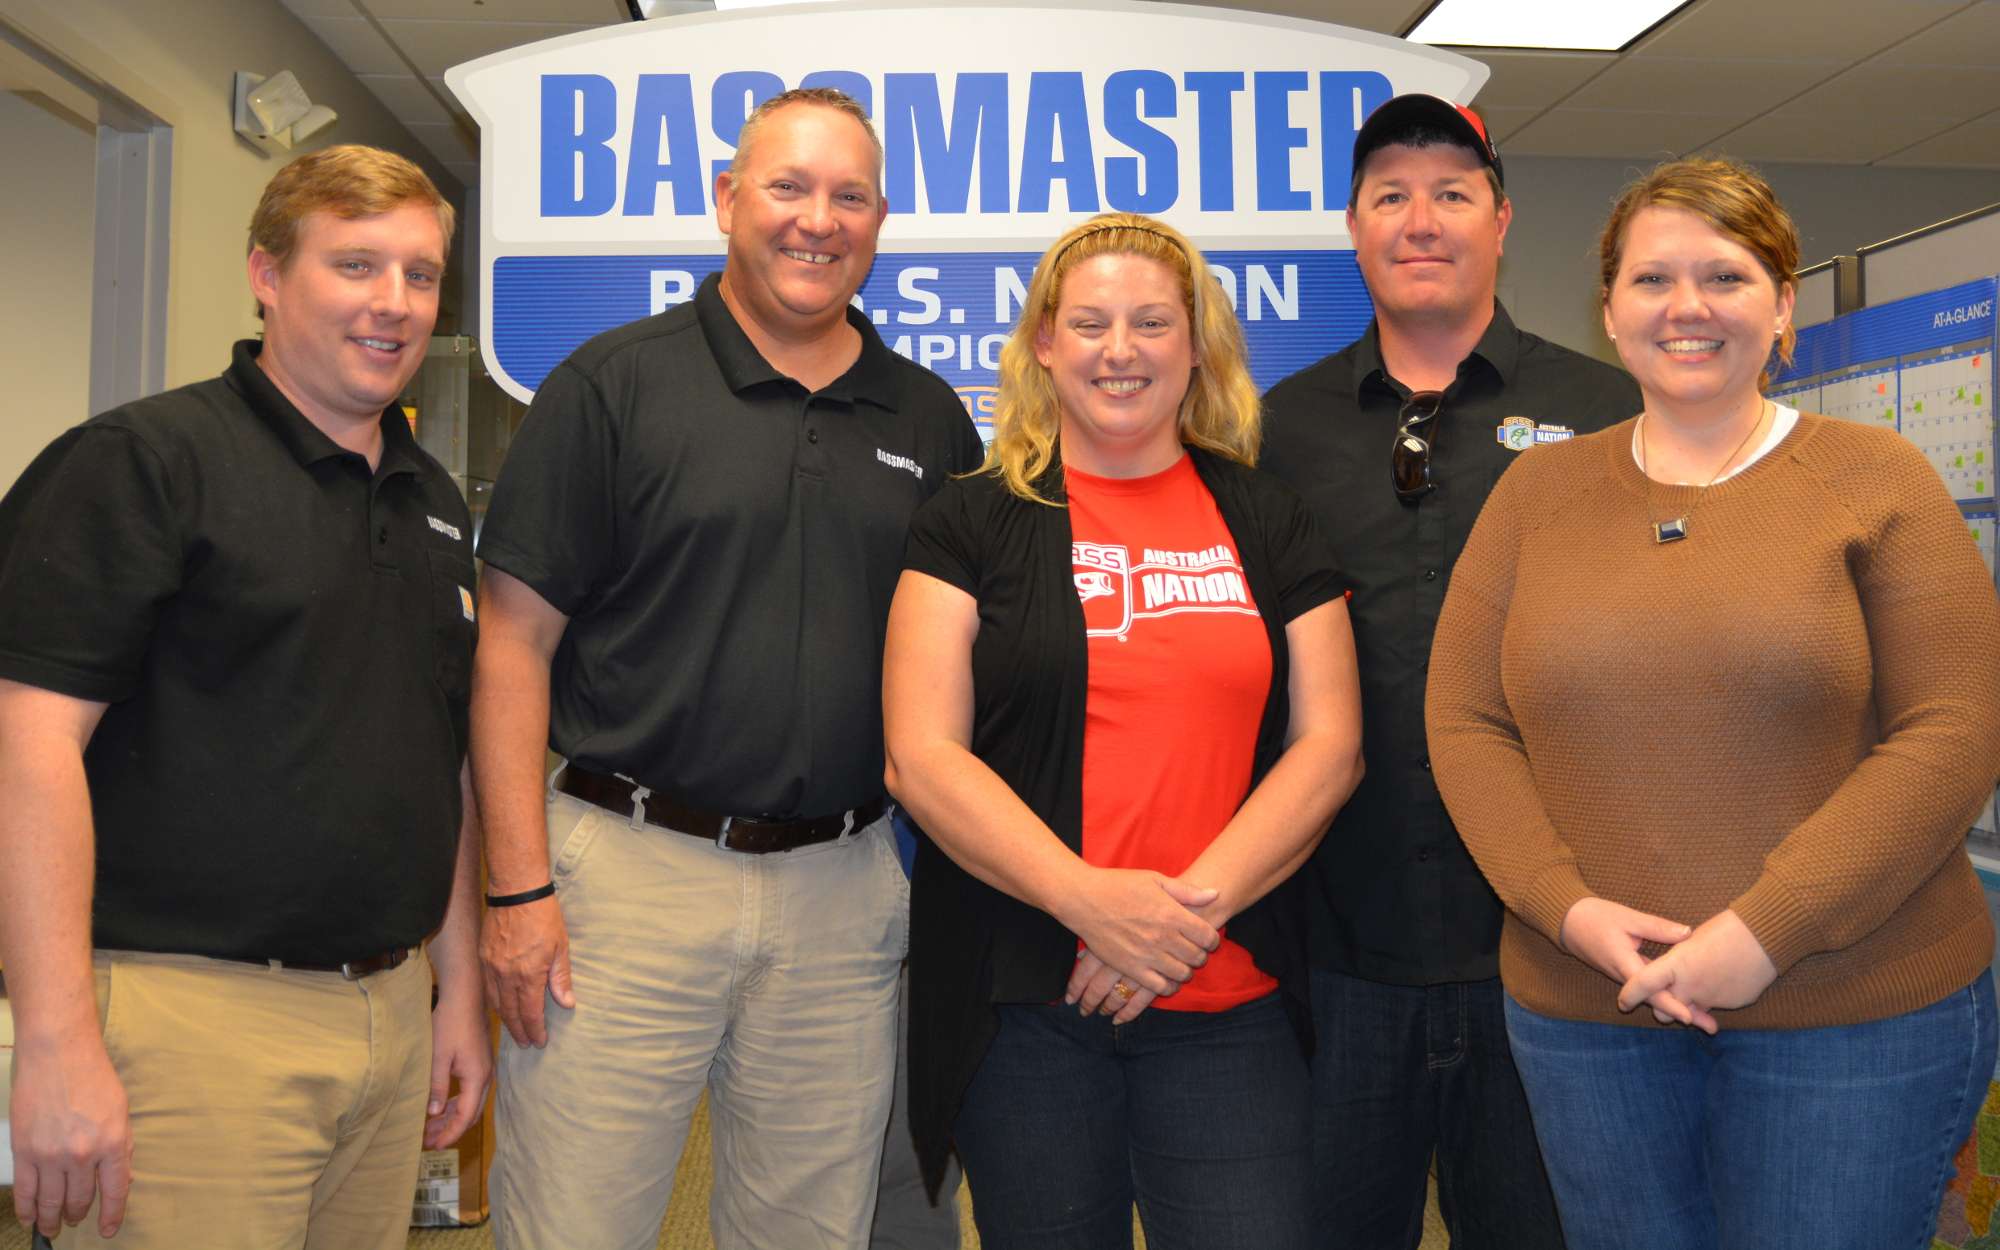 From left are Hank Weldon, manager of B.A.S.S. youth; Jon Stewart, director of the B.A.S.S. Nation; Kelly and McGrath; and Emily Hand, B.A.S.S. Nation coordinator.